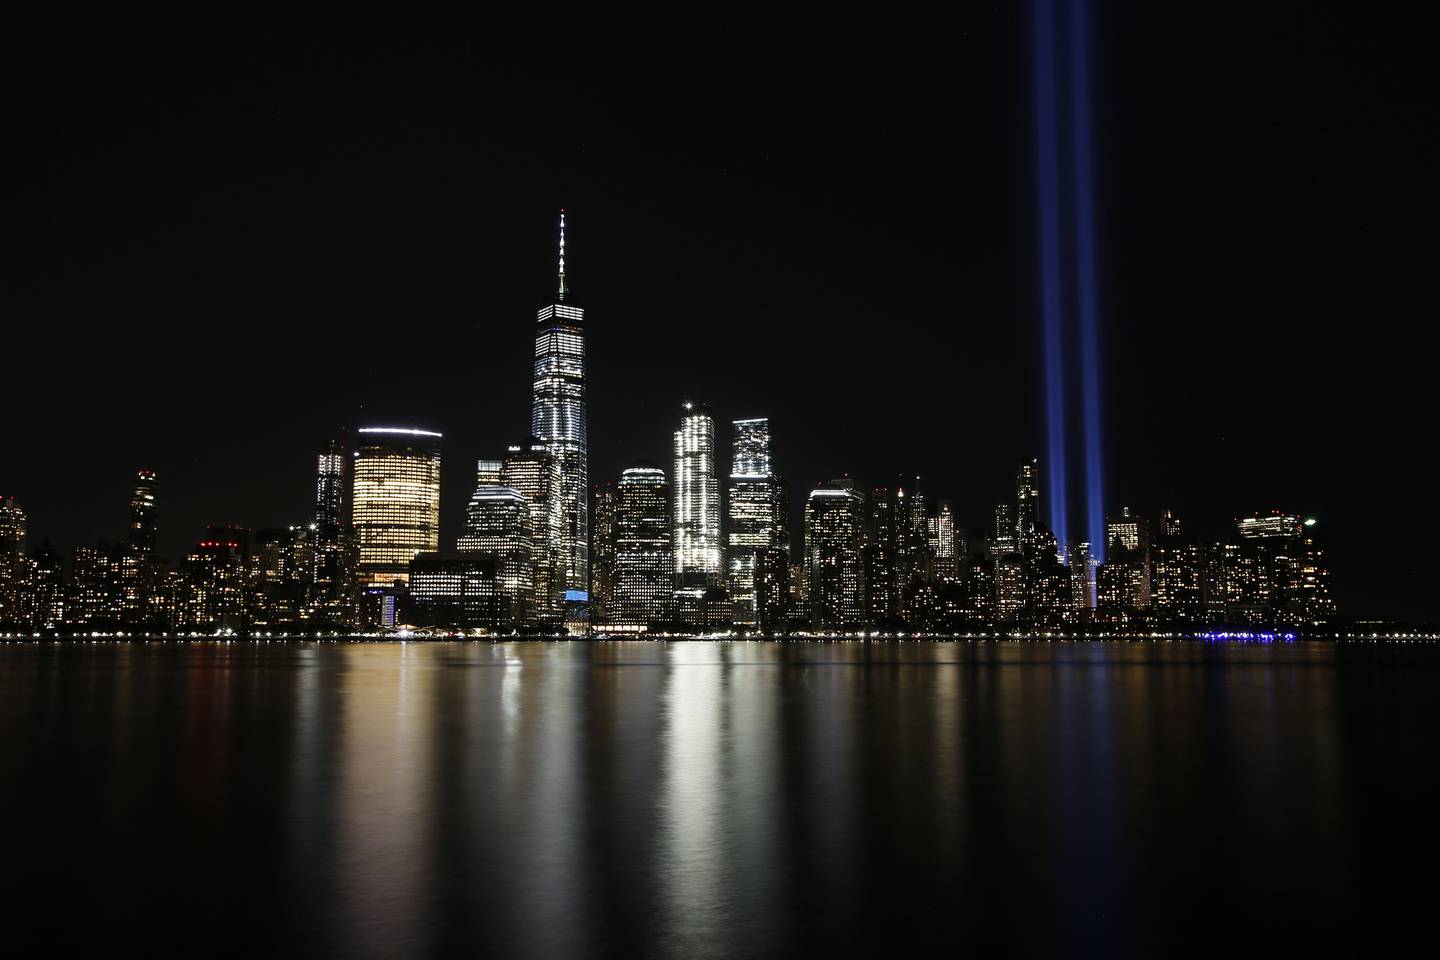 In this Sept. 11, 2017, file photo, the Tribute in Light illuminates in the sky above the Lower Manhattan area of New York, as seen from across the Hudson River in Jersey City, N.J.